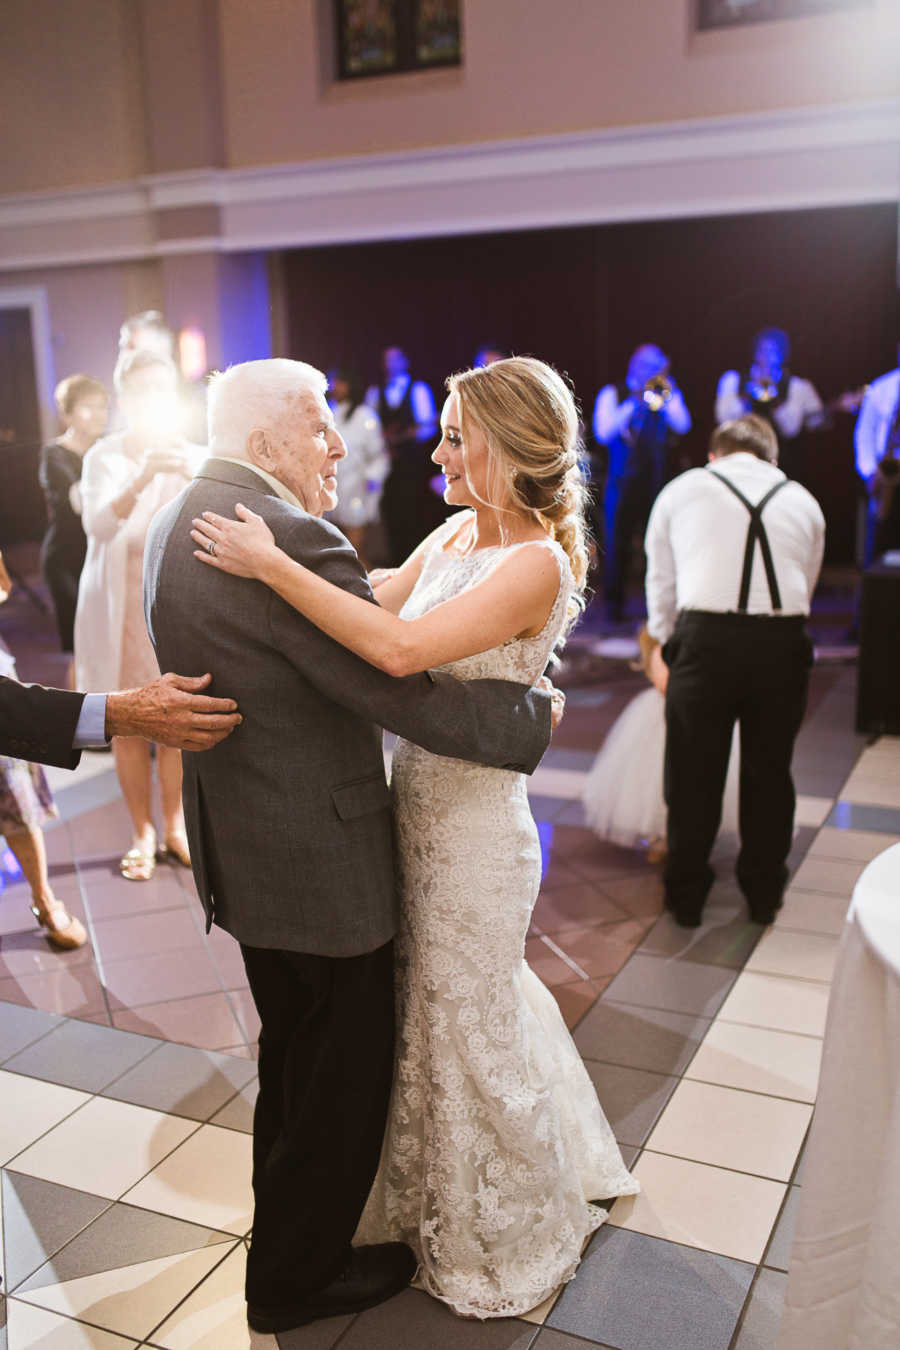 Bride dances with grandfather at her wedding reception